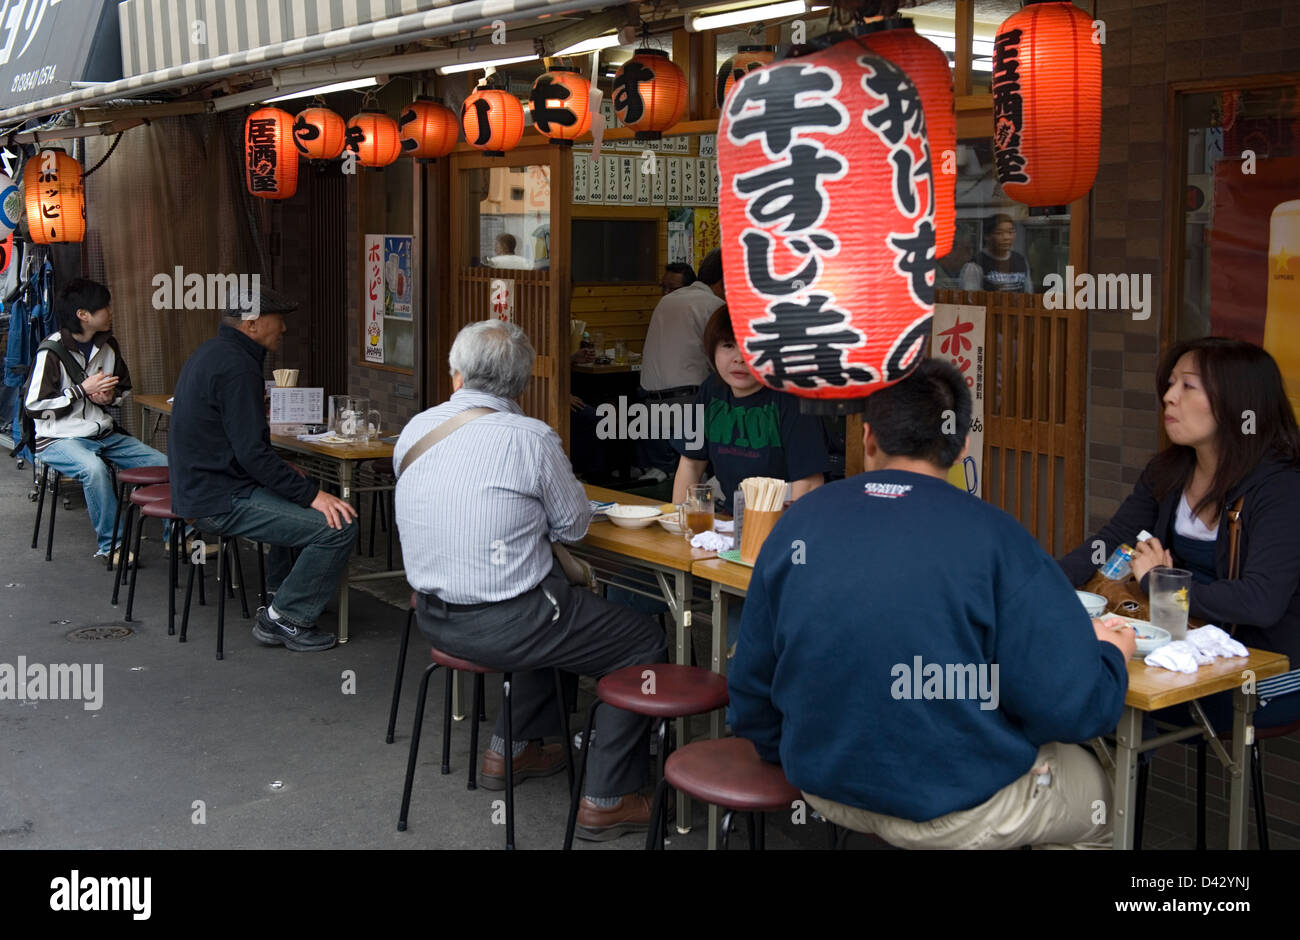 People stop for quick beer and small meal at street-side izakaya, or drinking establishment, in Asakusa, Tokyo. Stock Photo